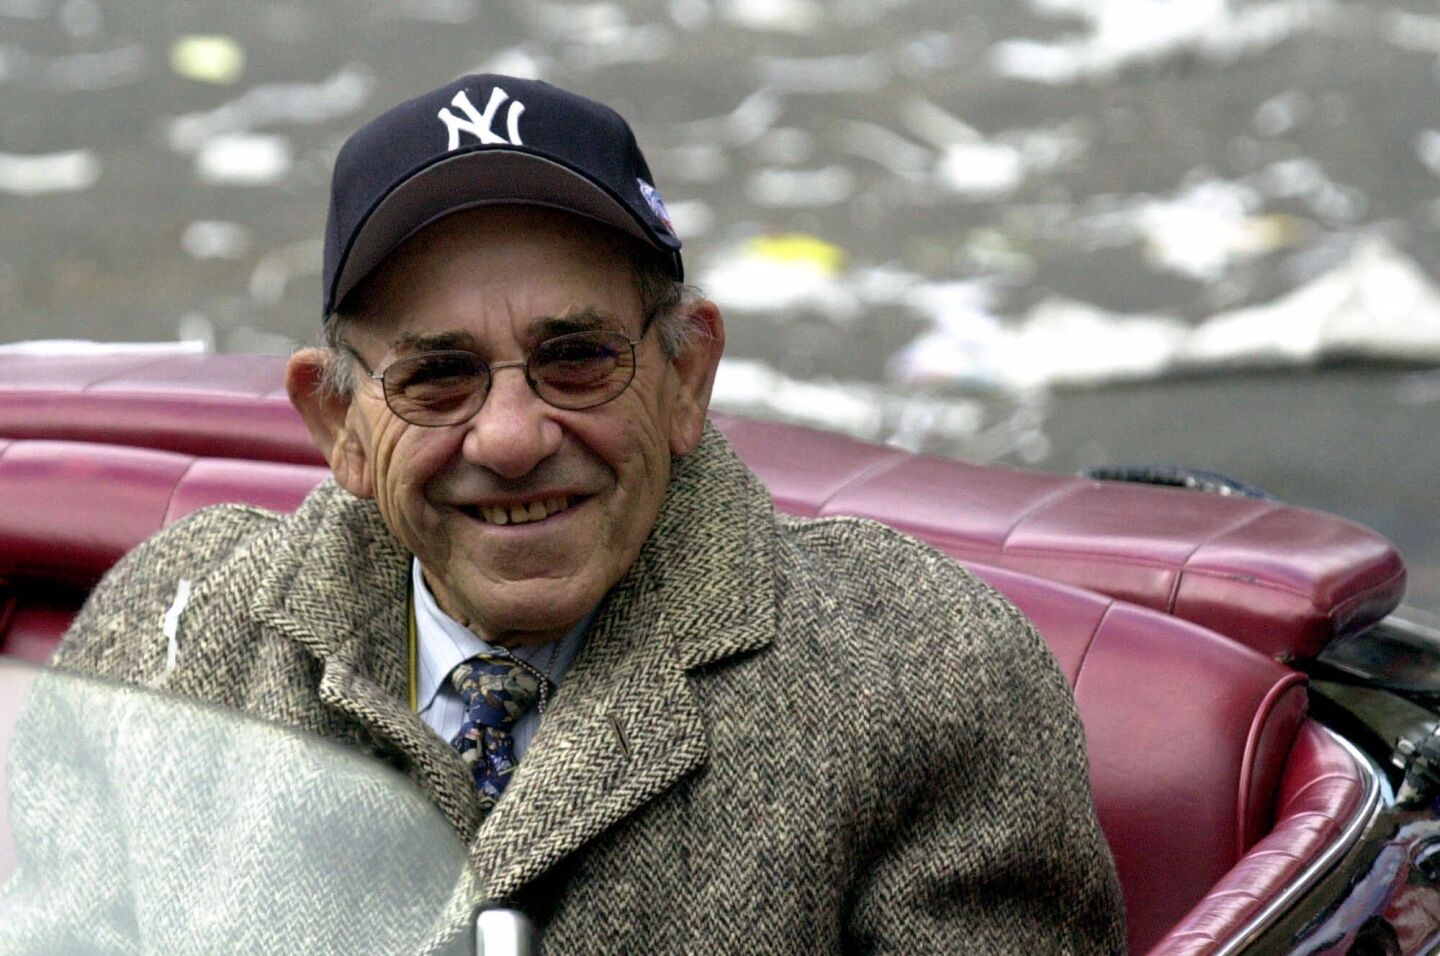 The Yankee Hall of Fame catcher was renowned as much for his dizzying malapropisms as his record 10 World Series championships. His wacky public utterances -- spoken with utter sincerity -- were quoted by presidents, professors and public speakers of all stripes, among millions of others. He was 90. Full obituary